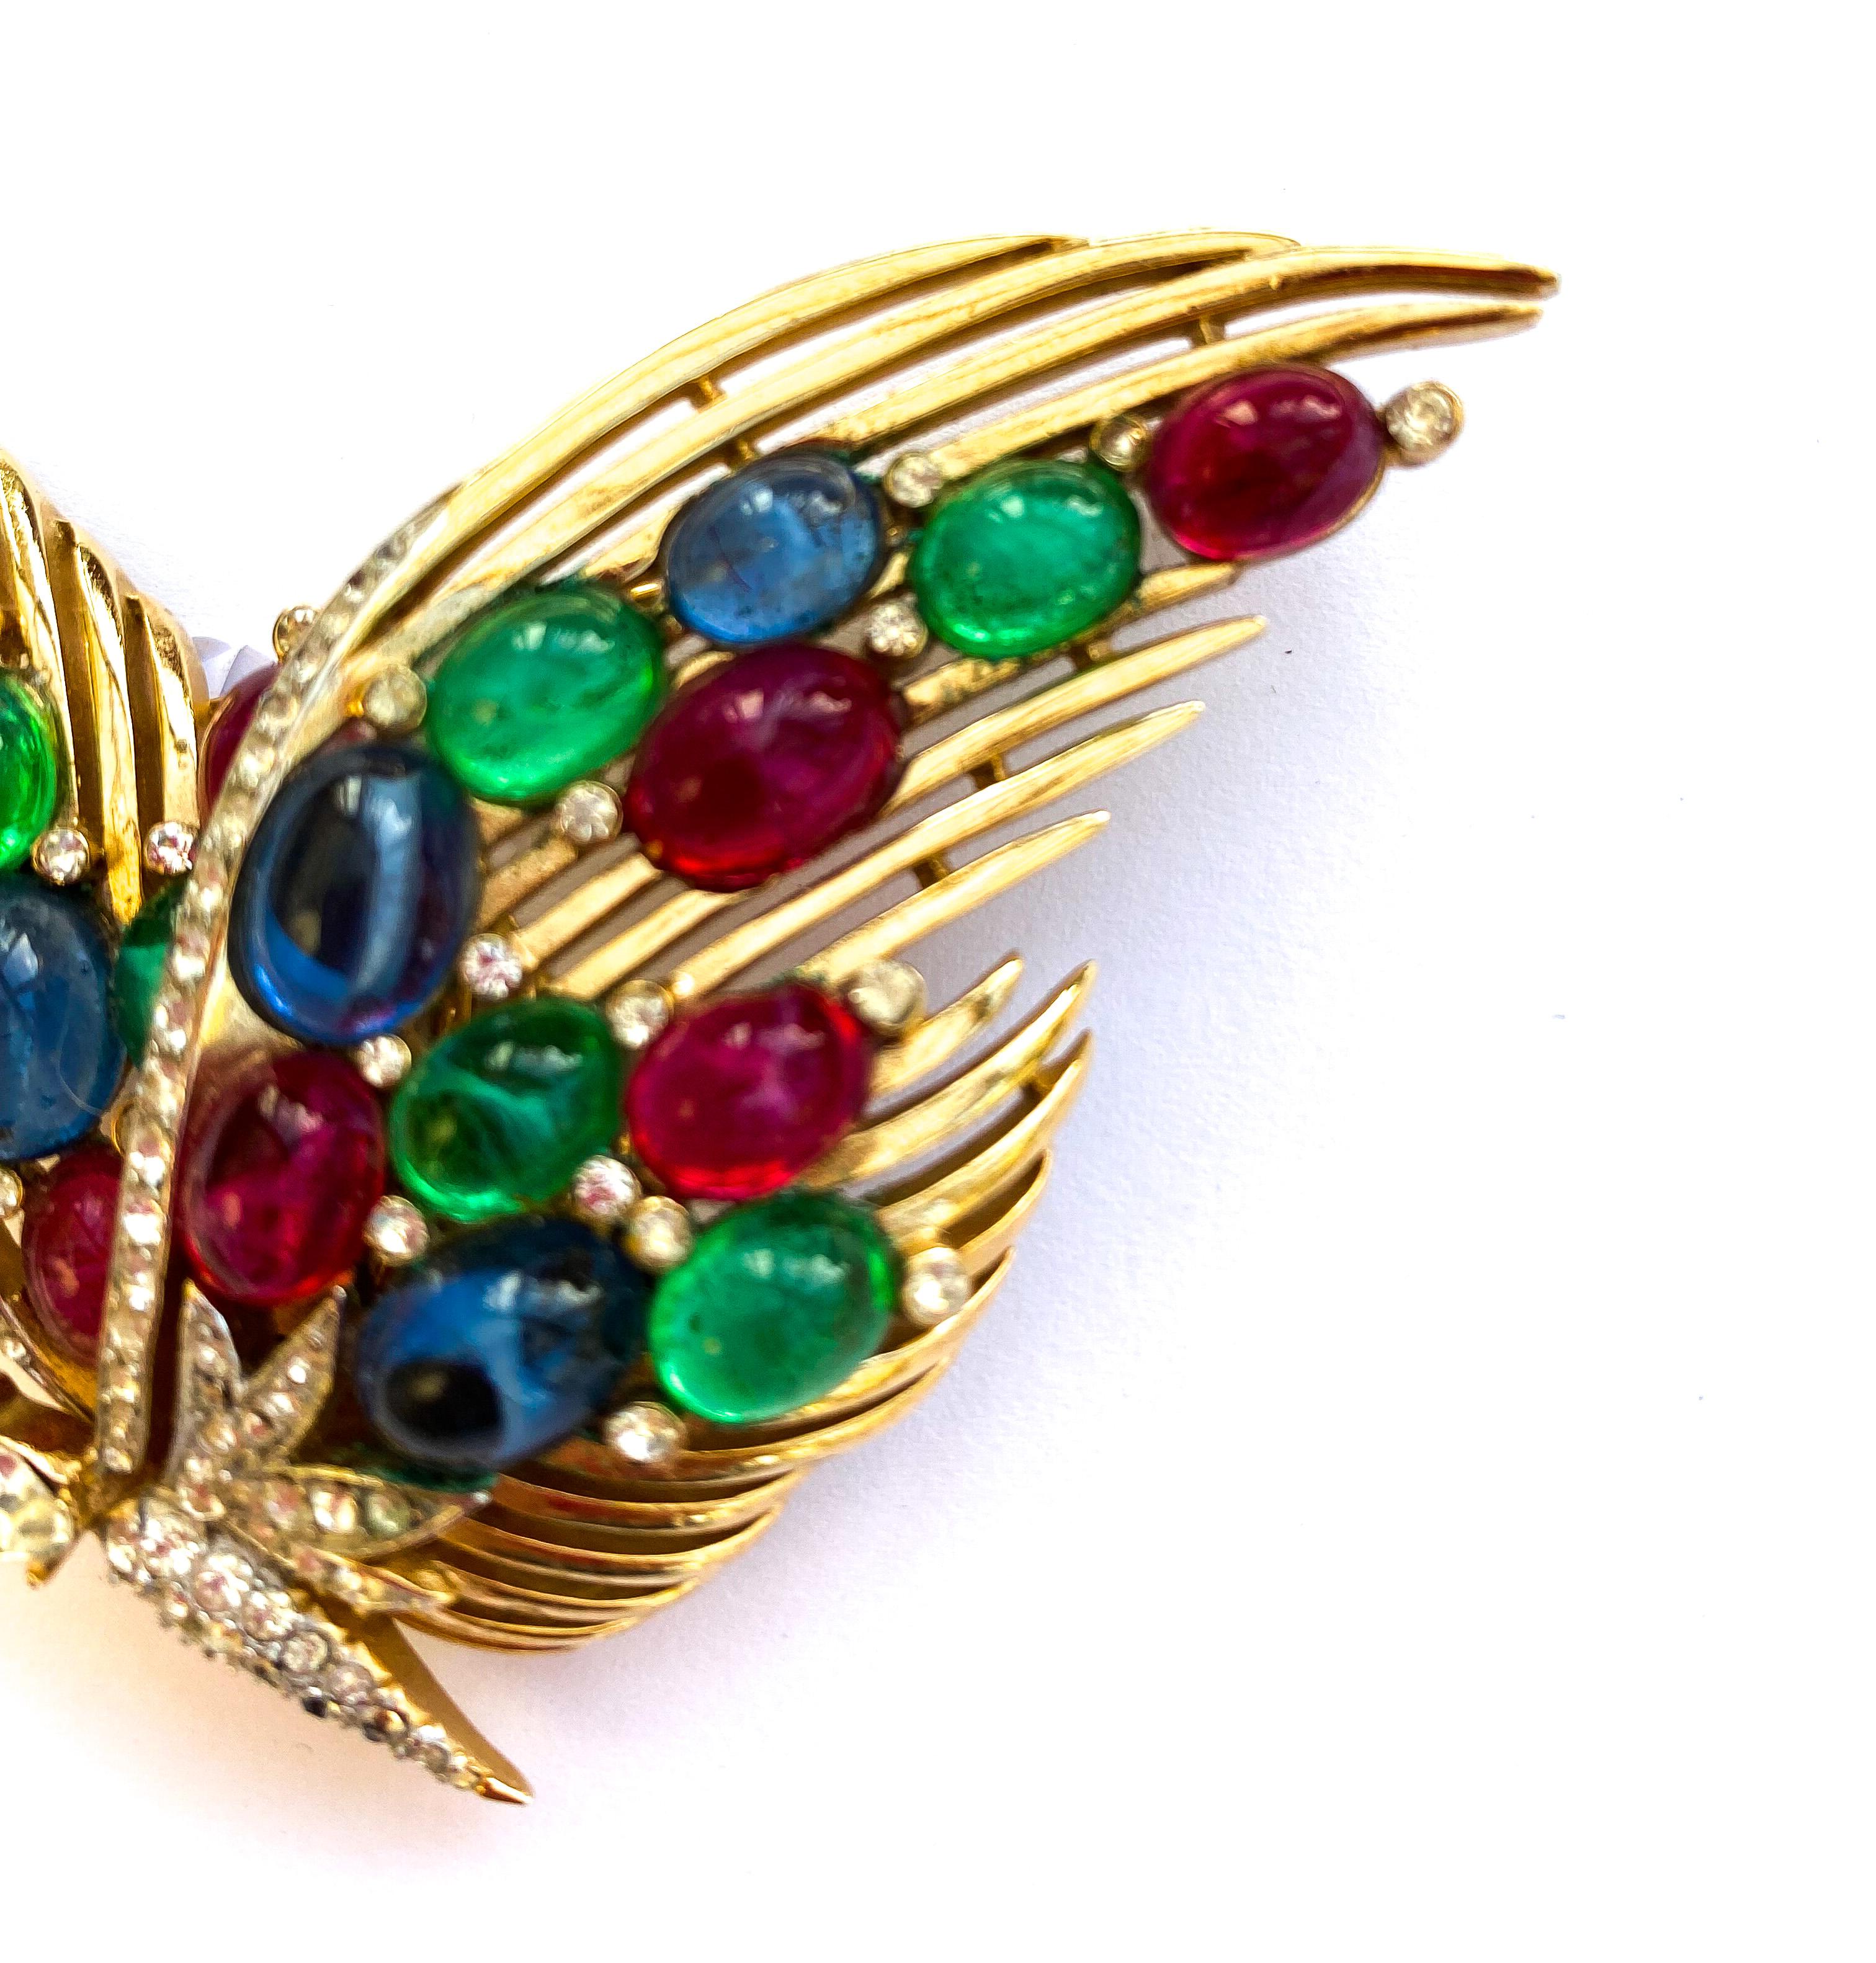 An outstanding and very rare brooch in the form of a beautiful and stylised butterfly, designed by Alfred Philippe for Trifari. It is part of a range of jewellery designed in the 'Moghul' style, using ruby, emerald and sapphire colours, reminiscent